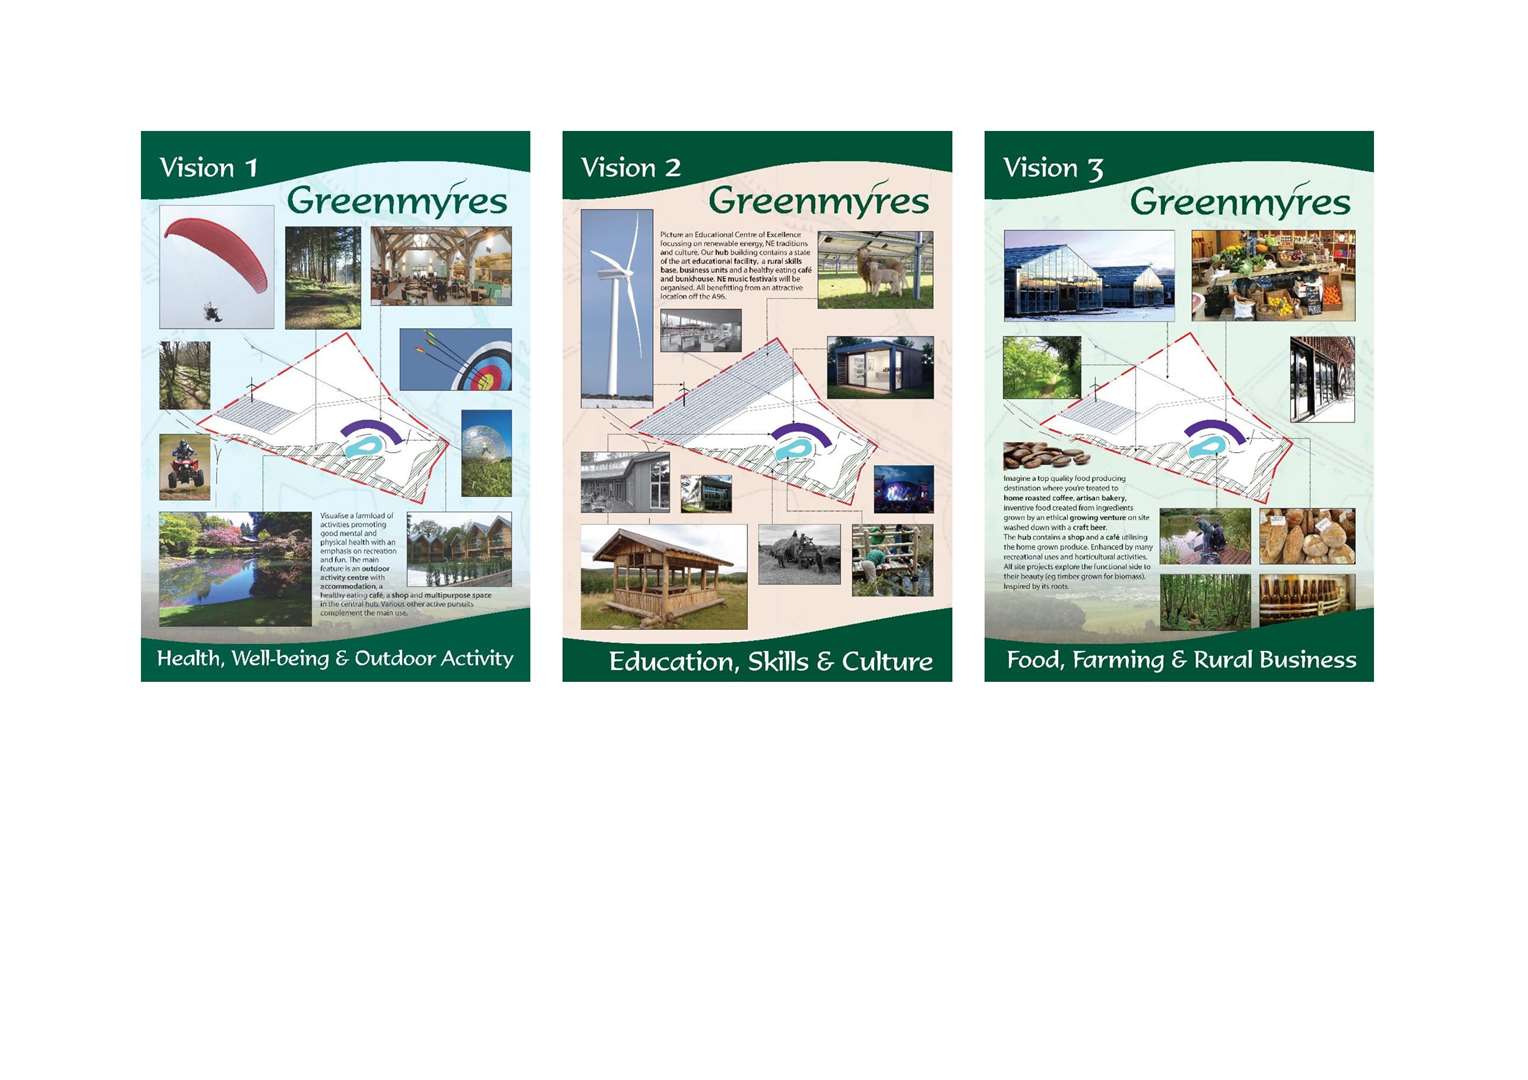 In 2015, the Huntly Developmetn Trust heard from the community about three visions for Greenmyers, aspects of which were included in current plans.